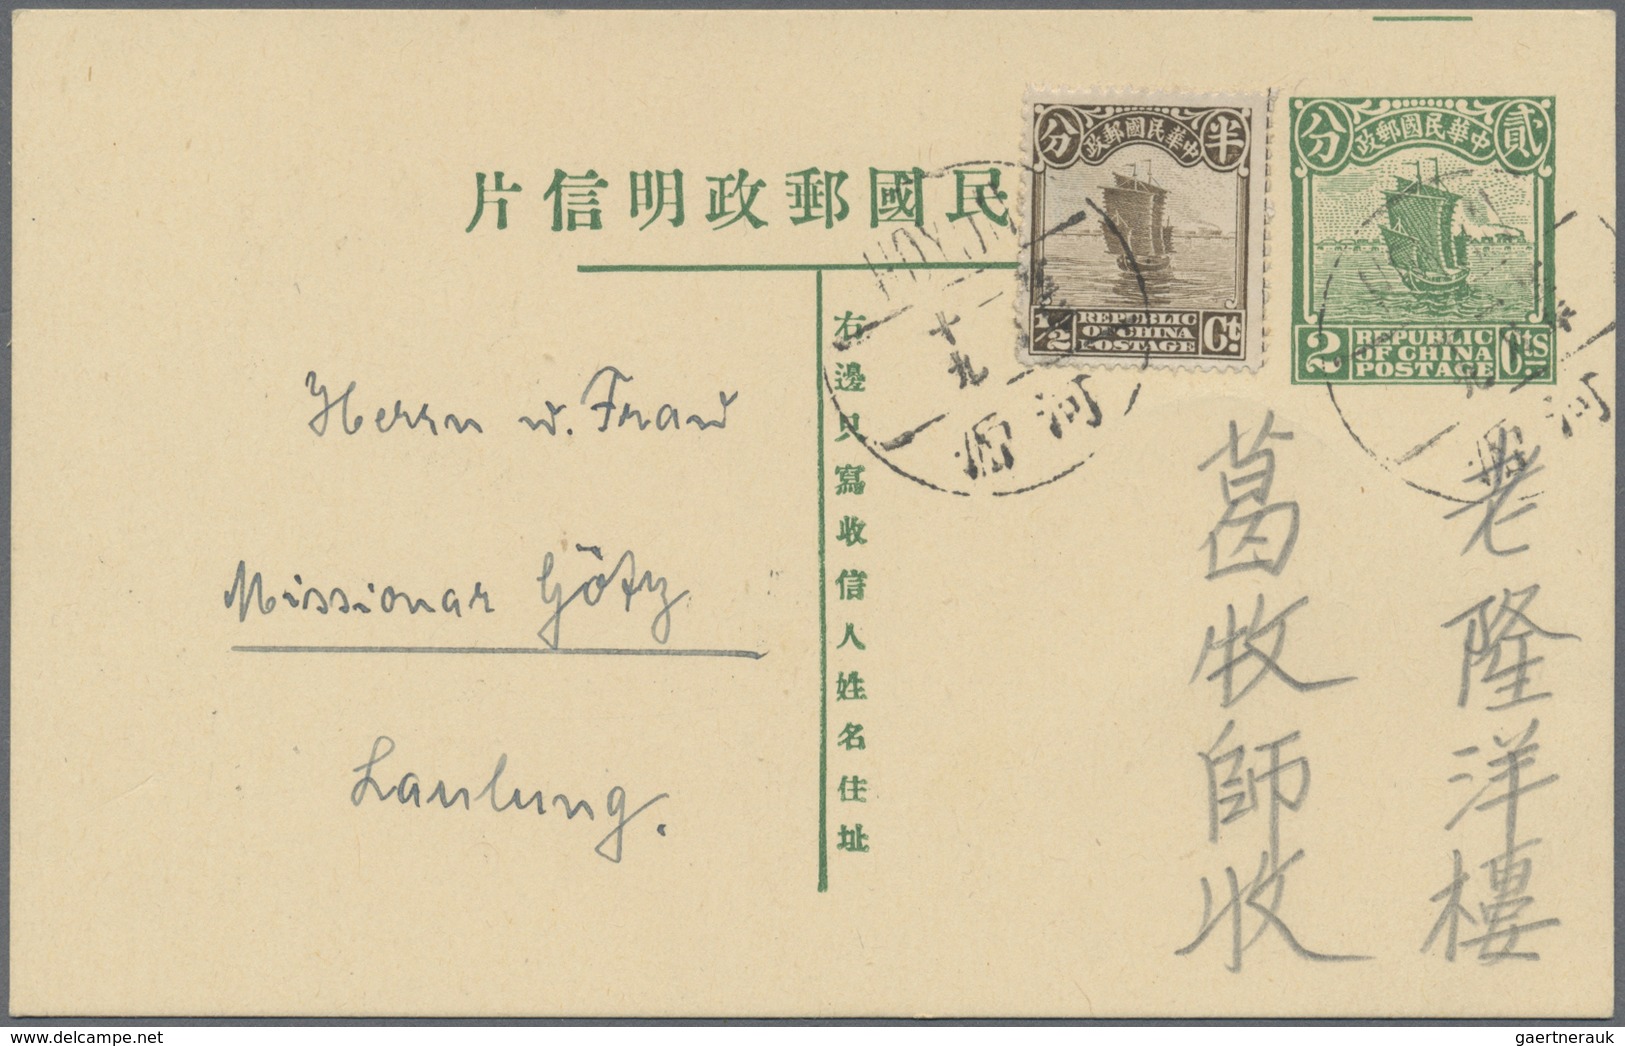 Br/GA China: 1925/1946, about 35 covers and stat. cards, mostly from missionary correspondence to Germany